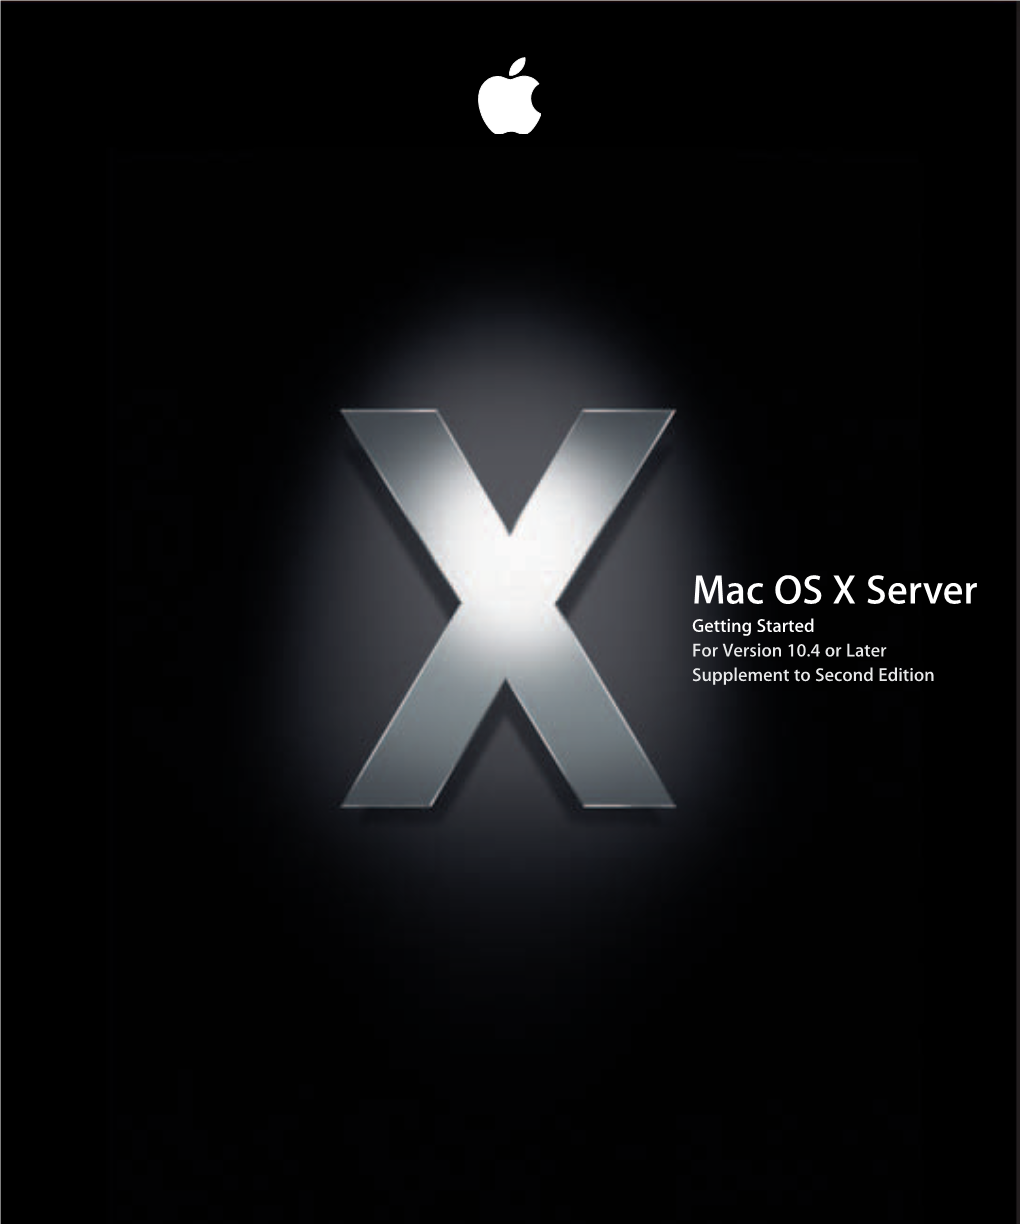 Mac OS X Server Getting Started Supplement